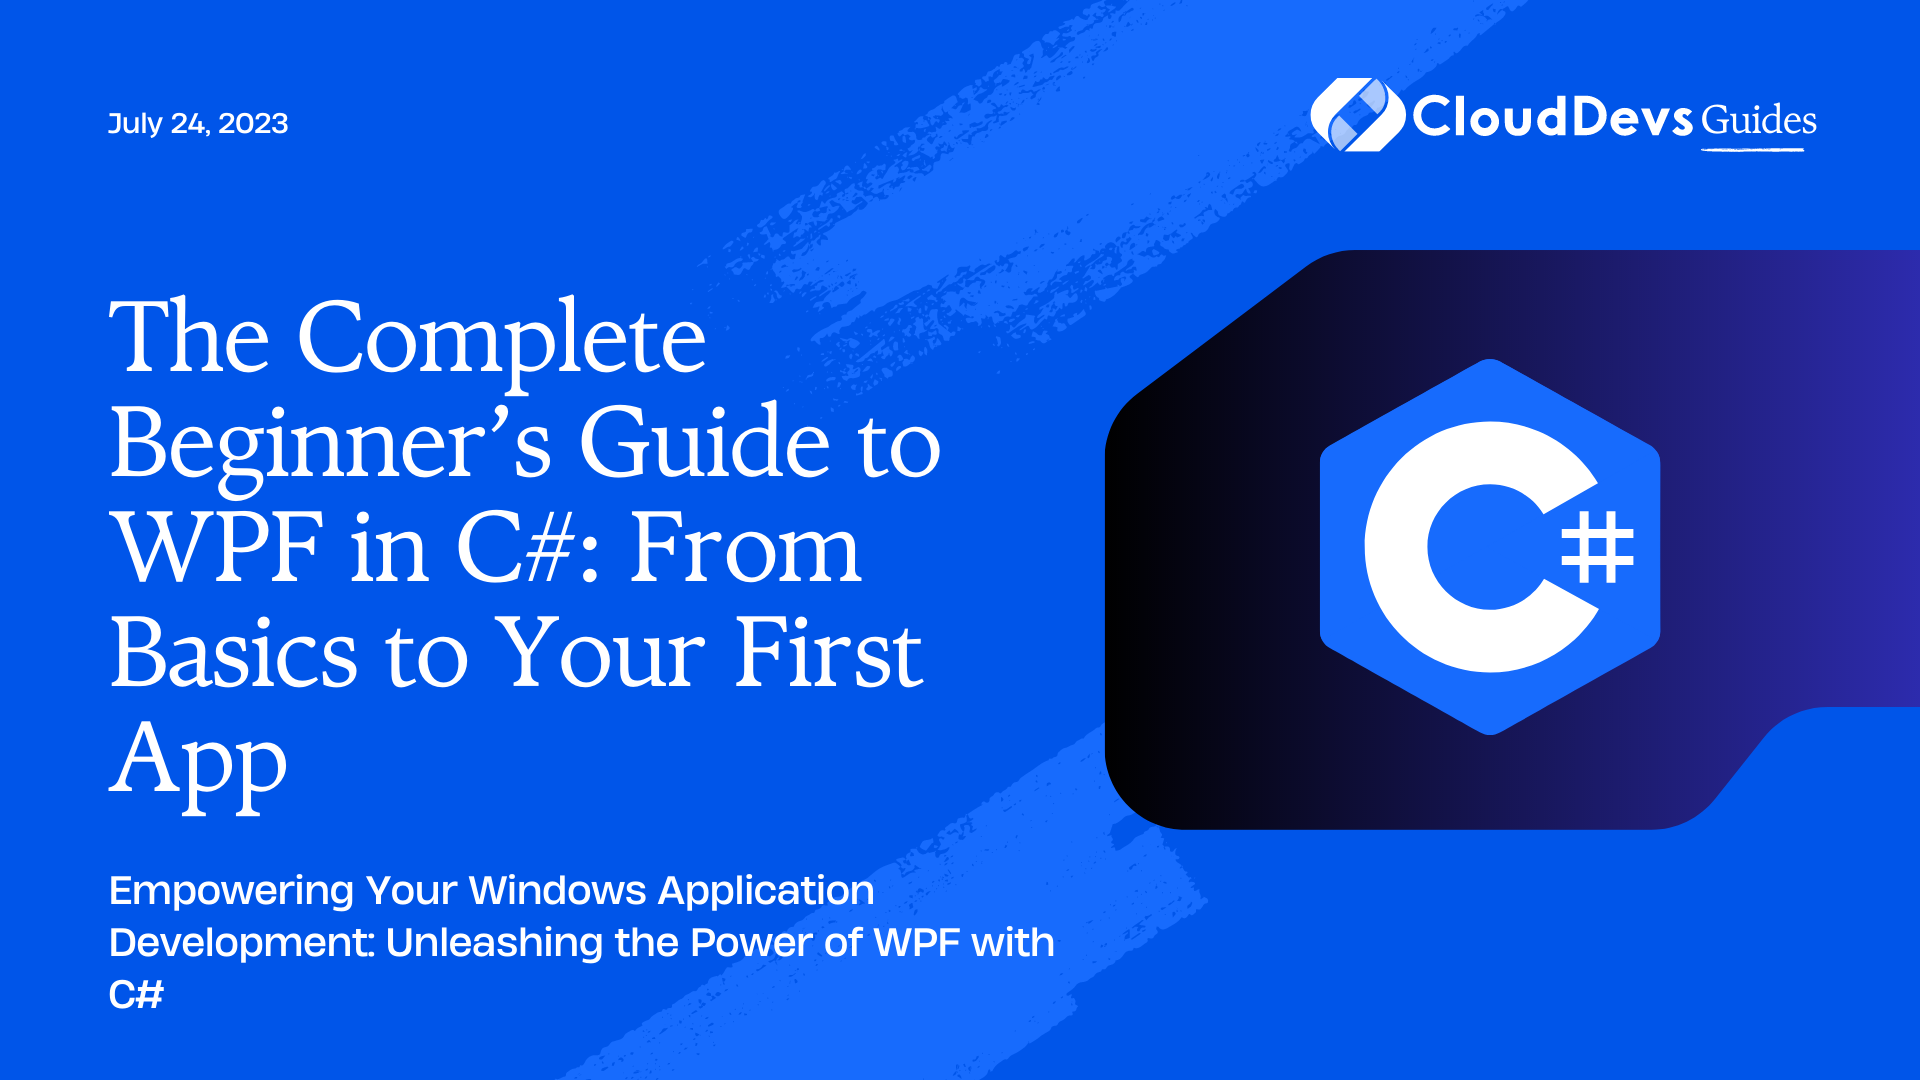 The Complete Beginner’s Guide to WPF in C#: From Basics to Your First App